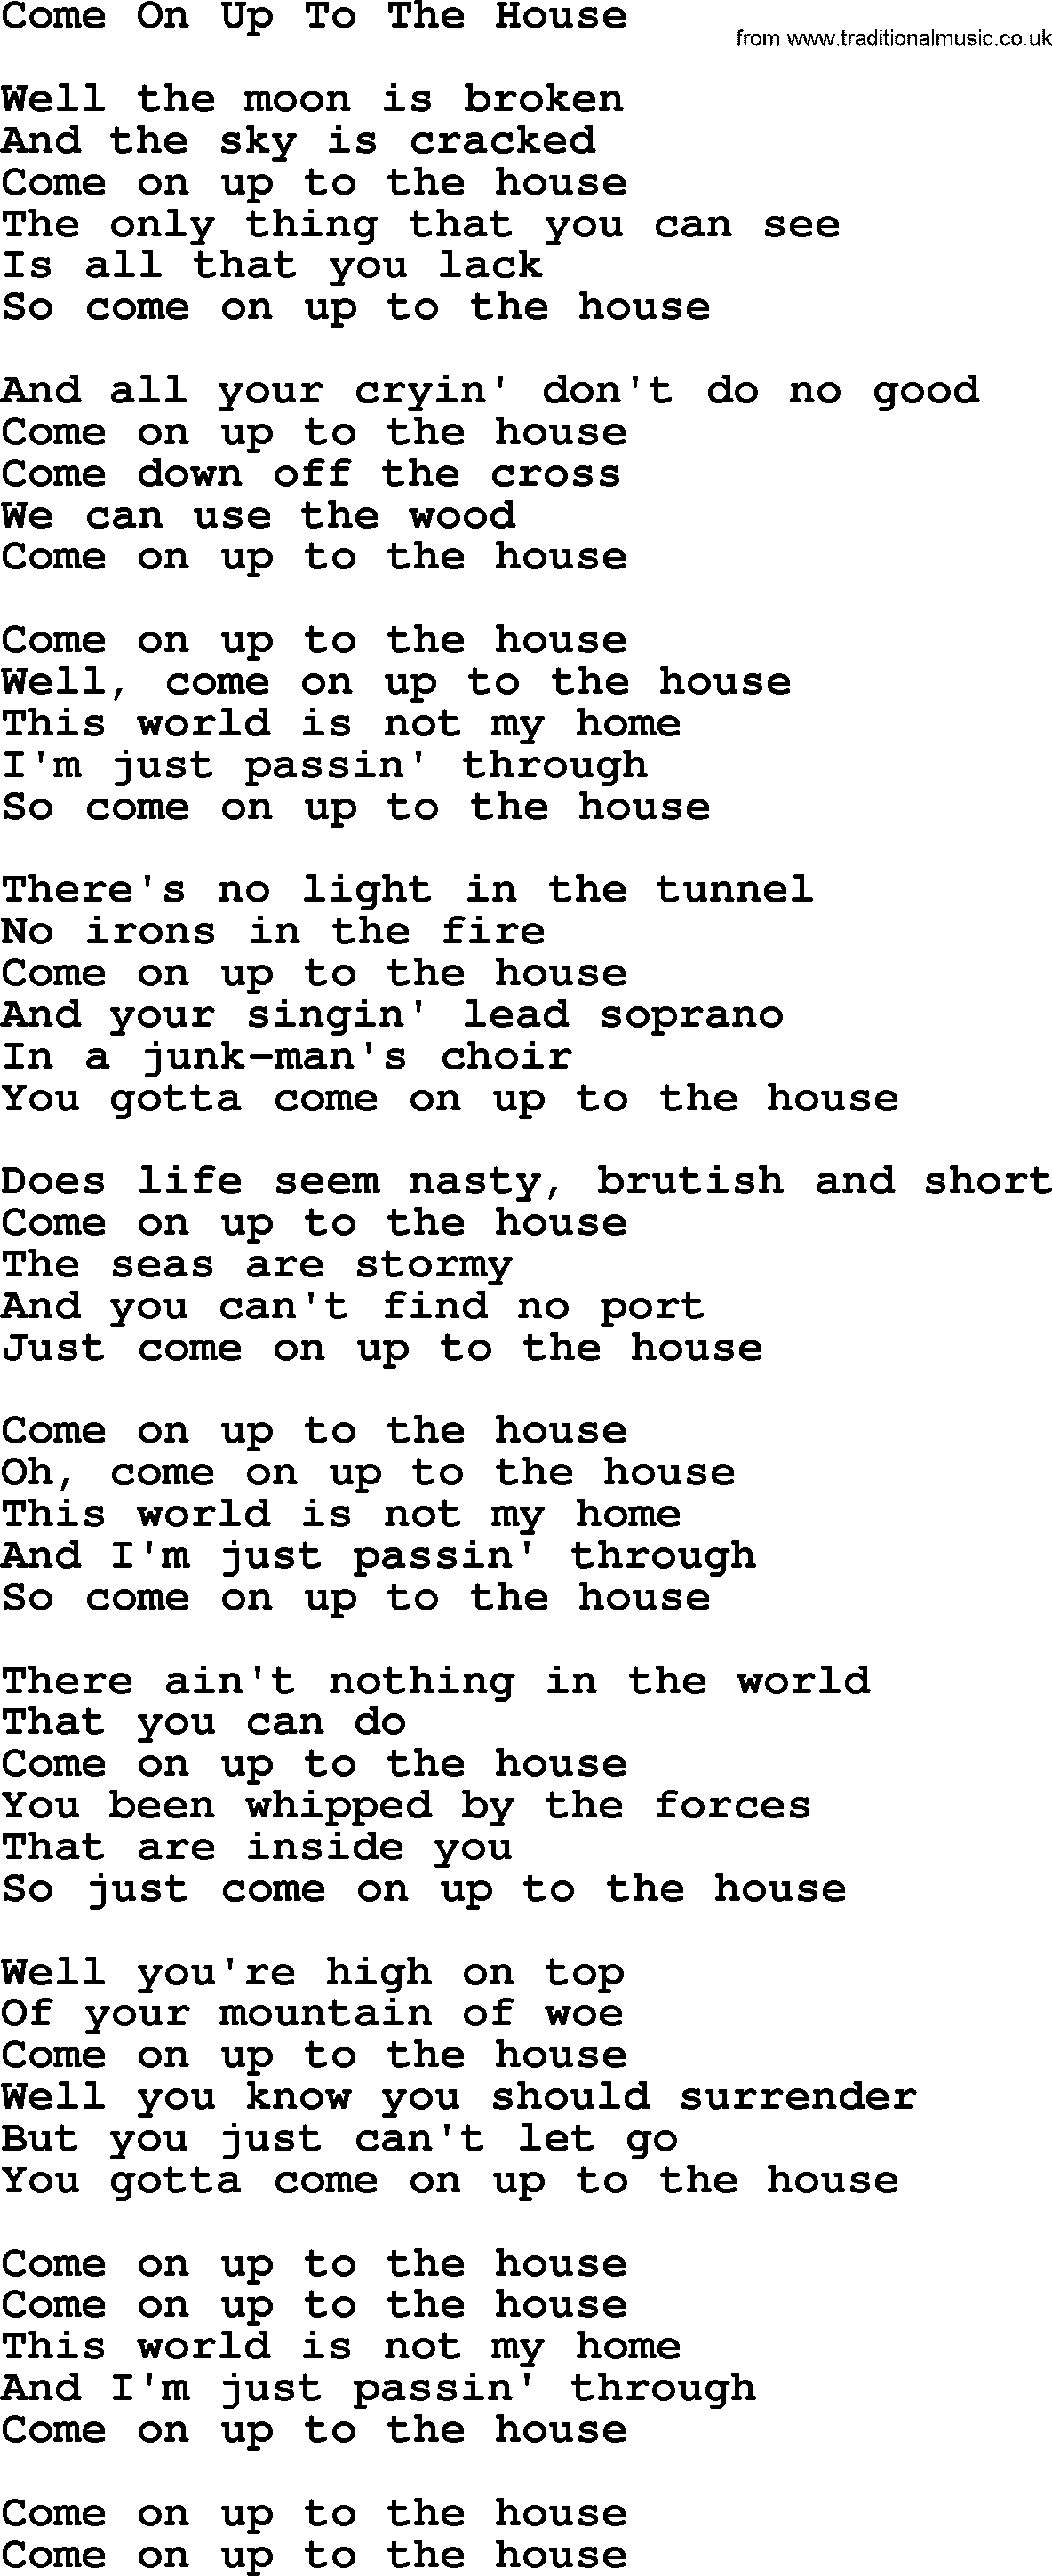 Willie Nelson song: Come On Up To The House lyrics